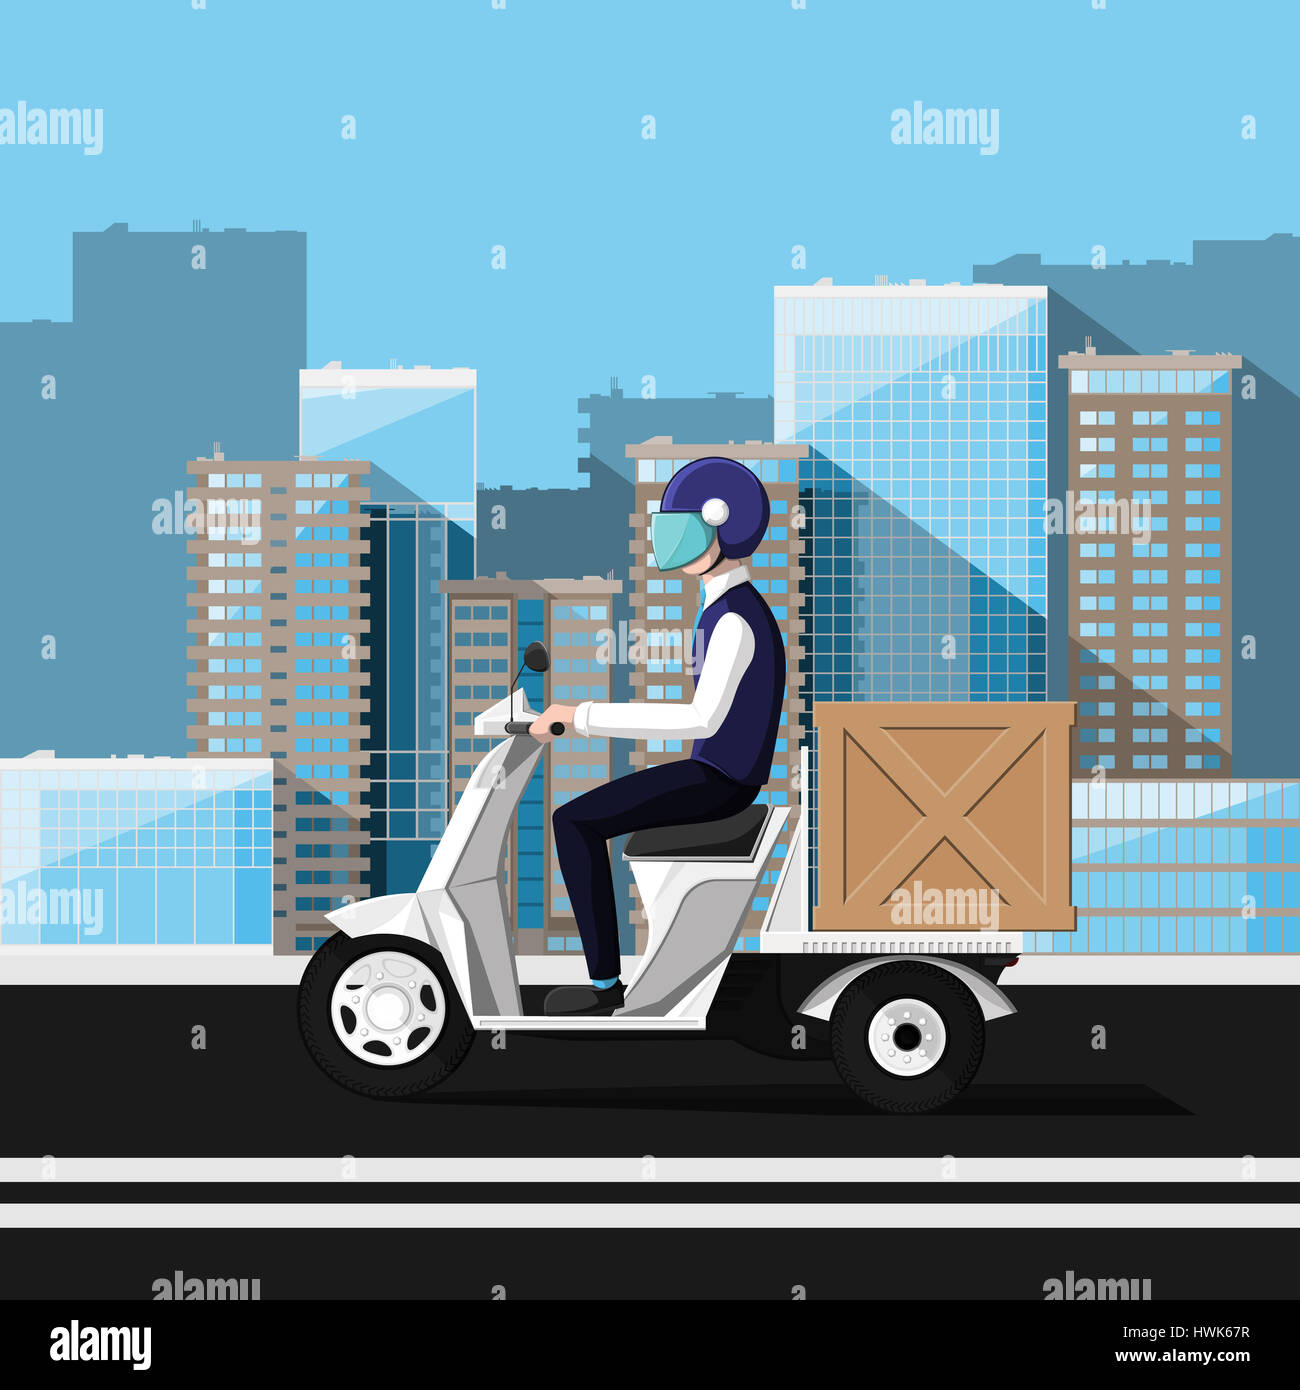 Deliveryman rides on a motor scooter with delivery box against background of the cityscape. Flat design illustration. Stock Photo